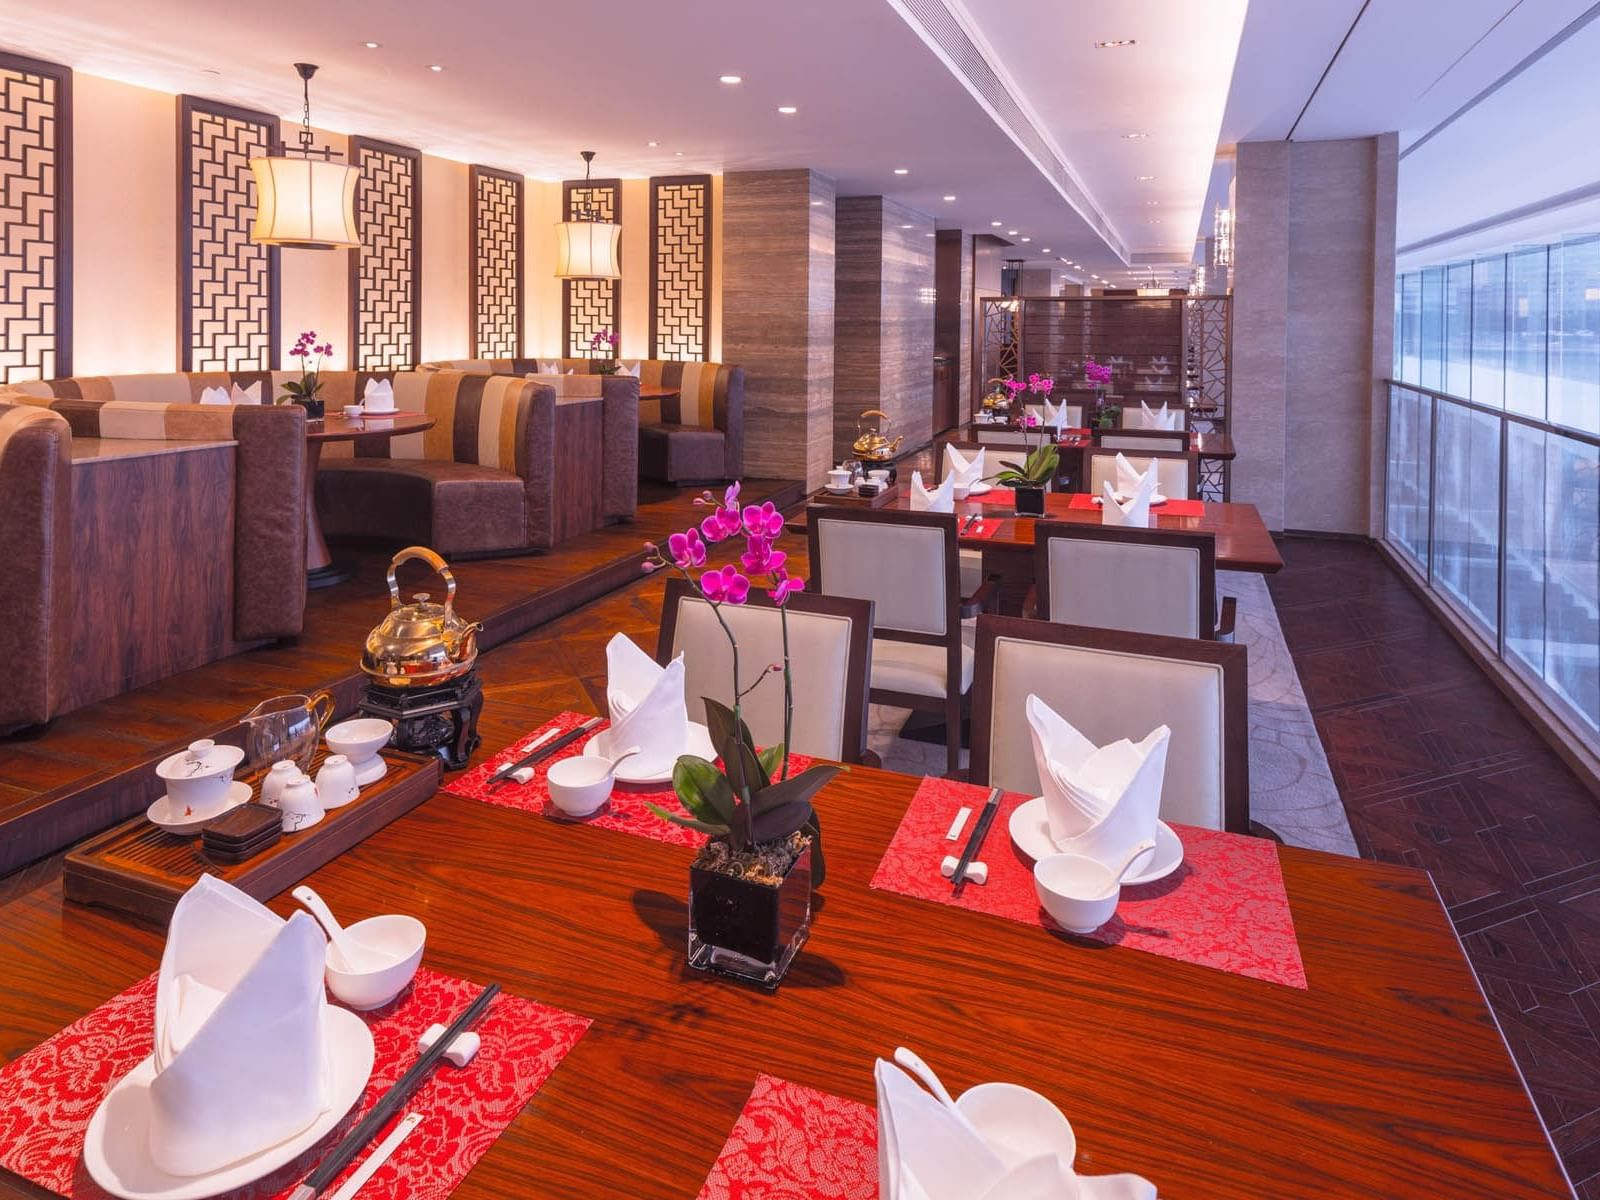 Interior of Flavor of China Restaurant at White Swan hotel